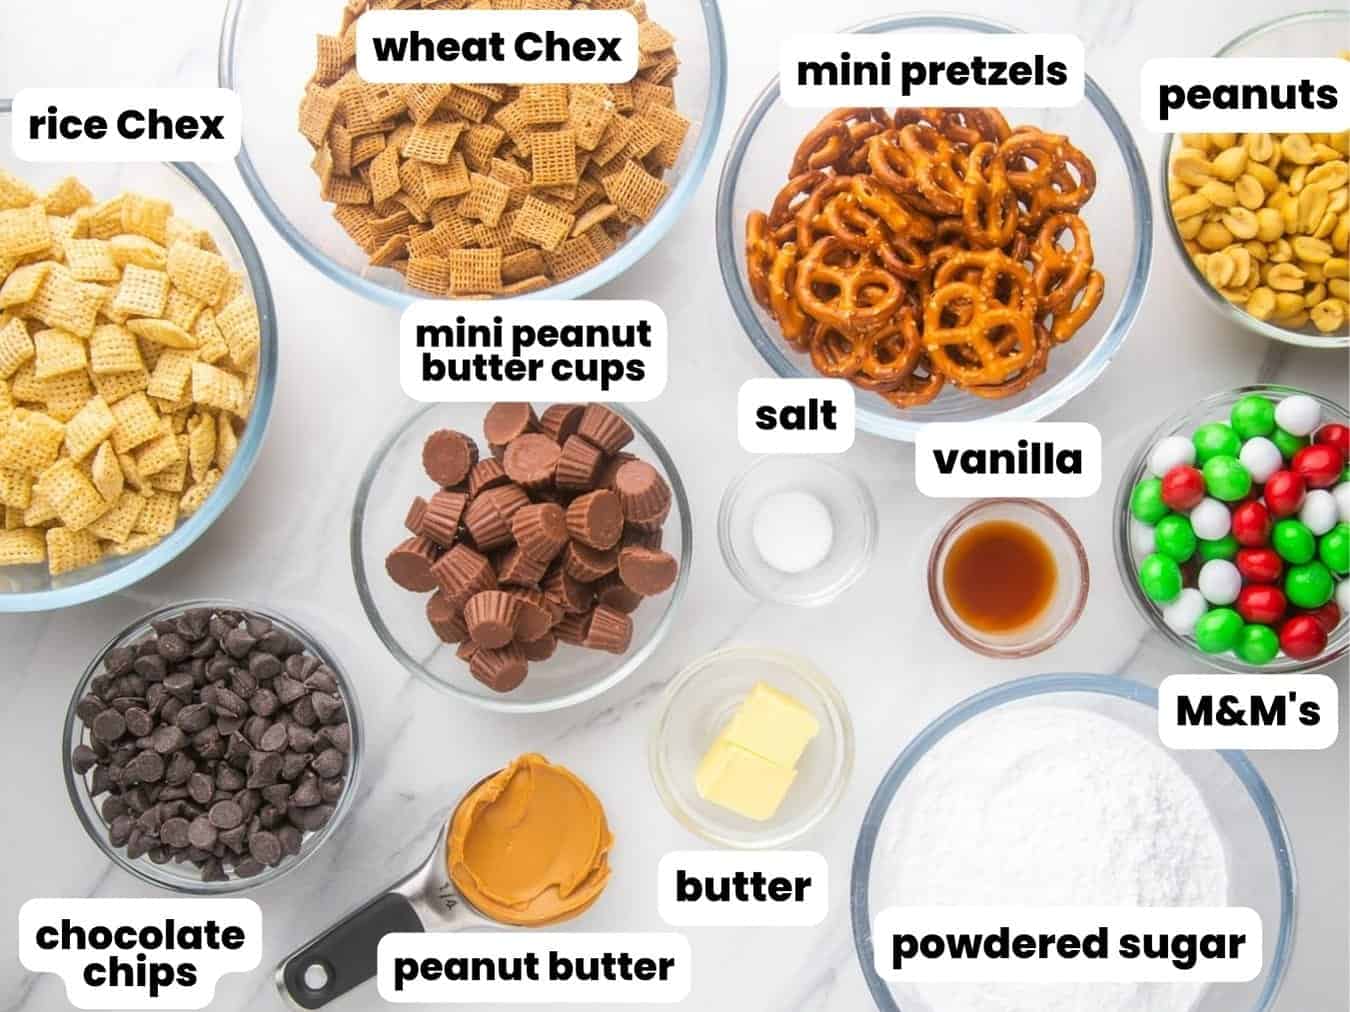 All of the ingredients needed to make christmas puppy chow, in separate bowls on the counter.